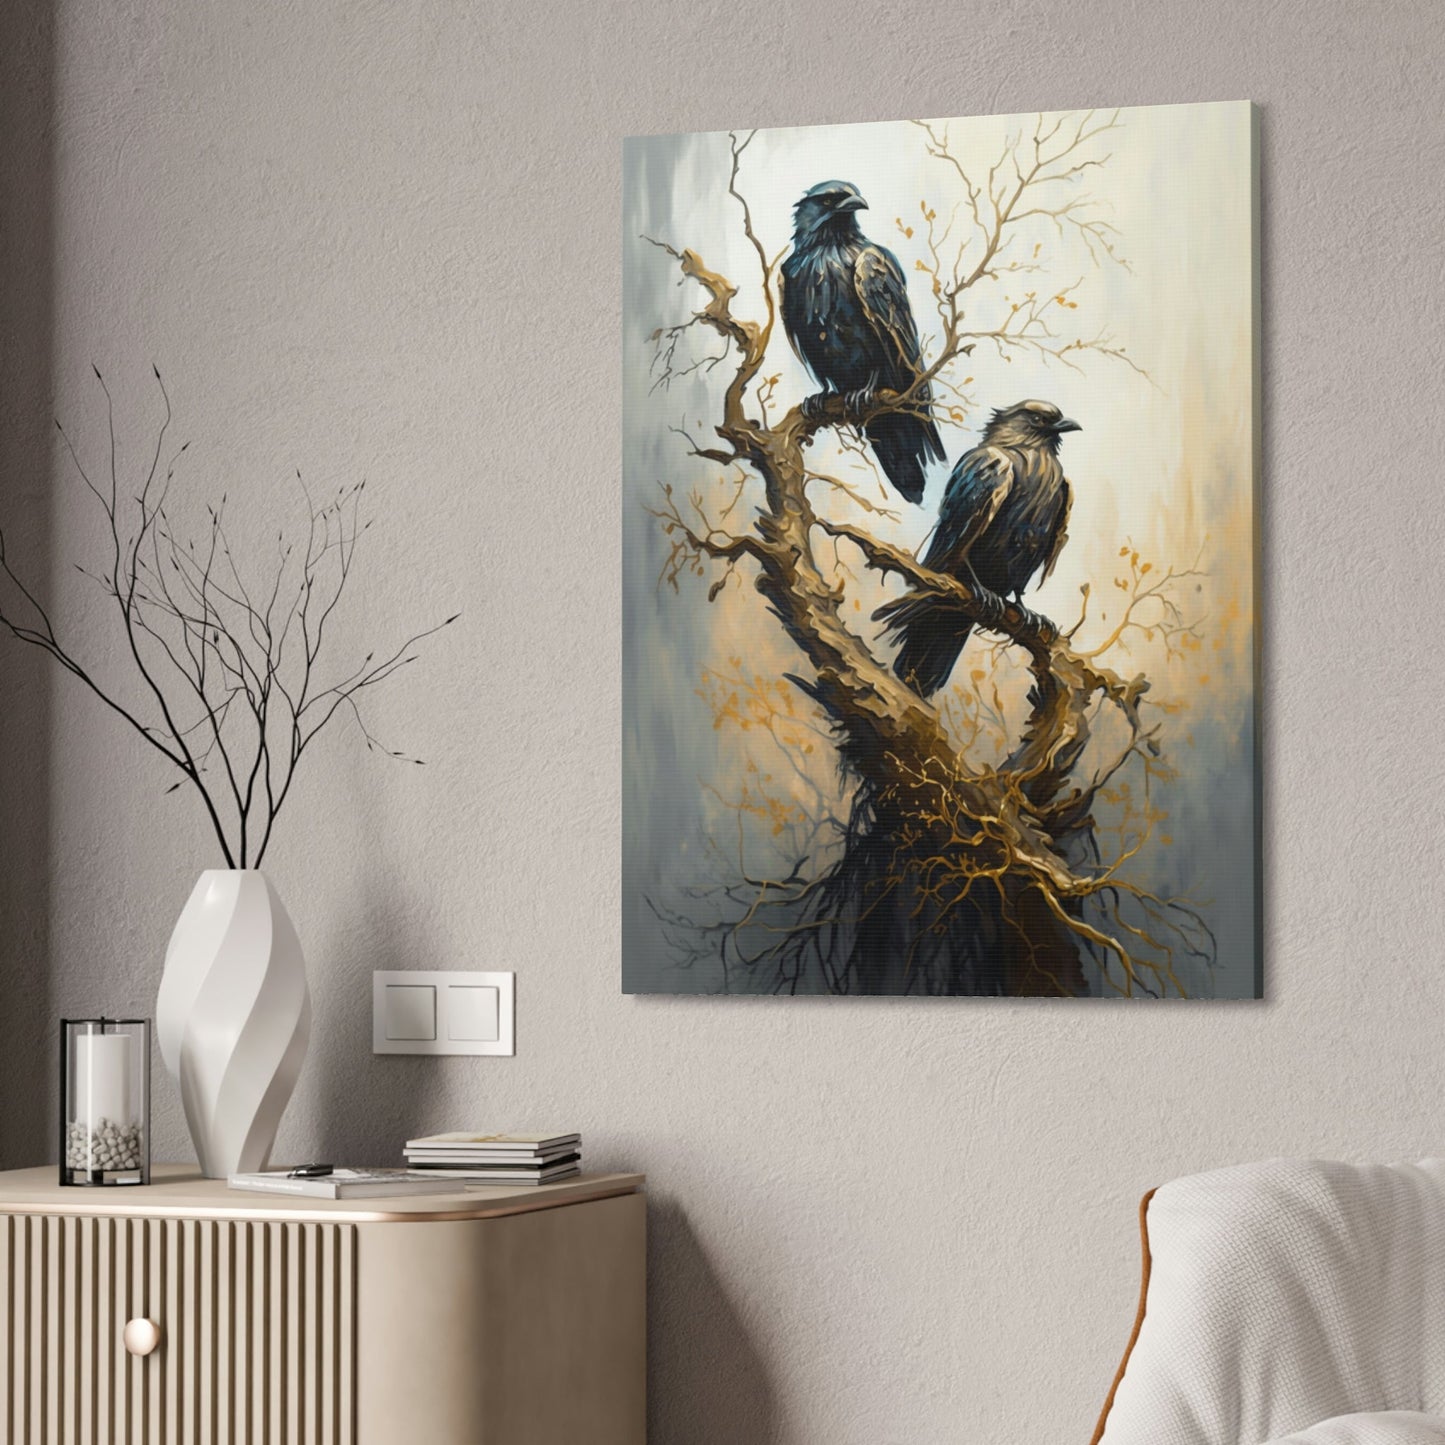 A Gathering of Ravens: A Mystical Forest Scene